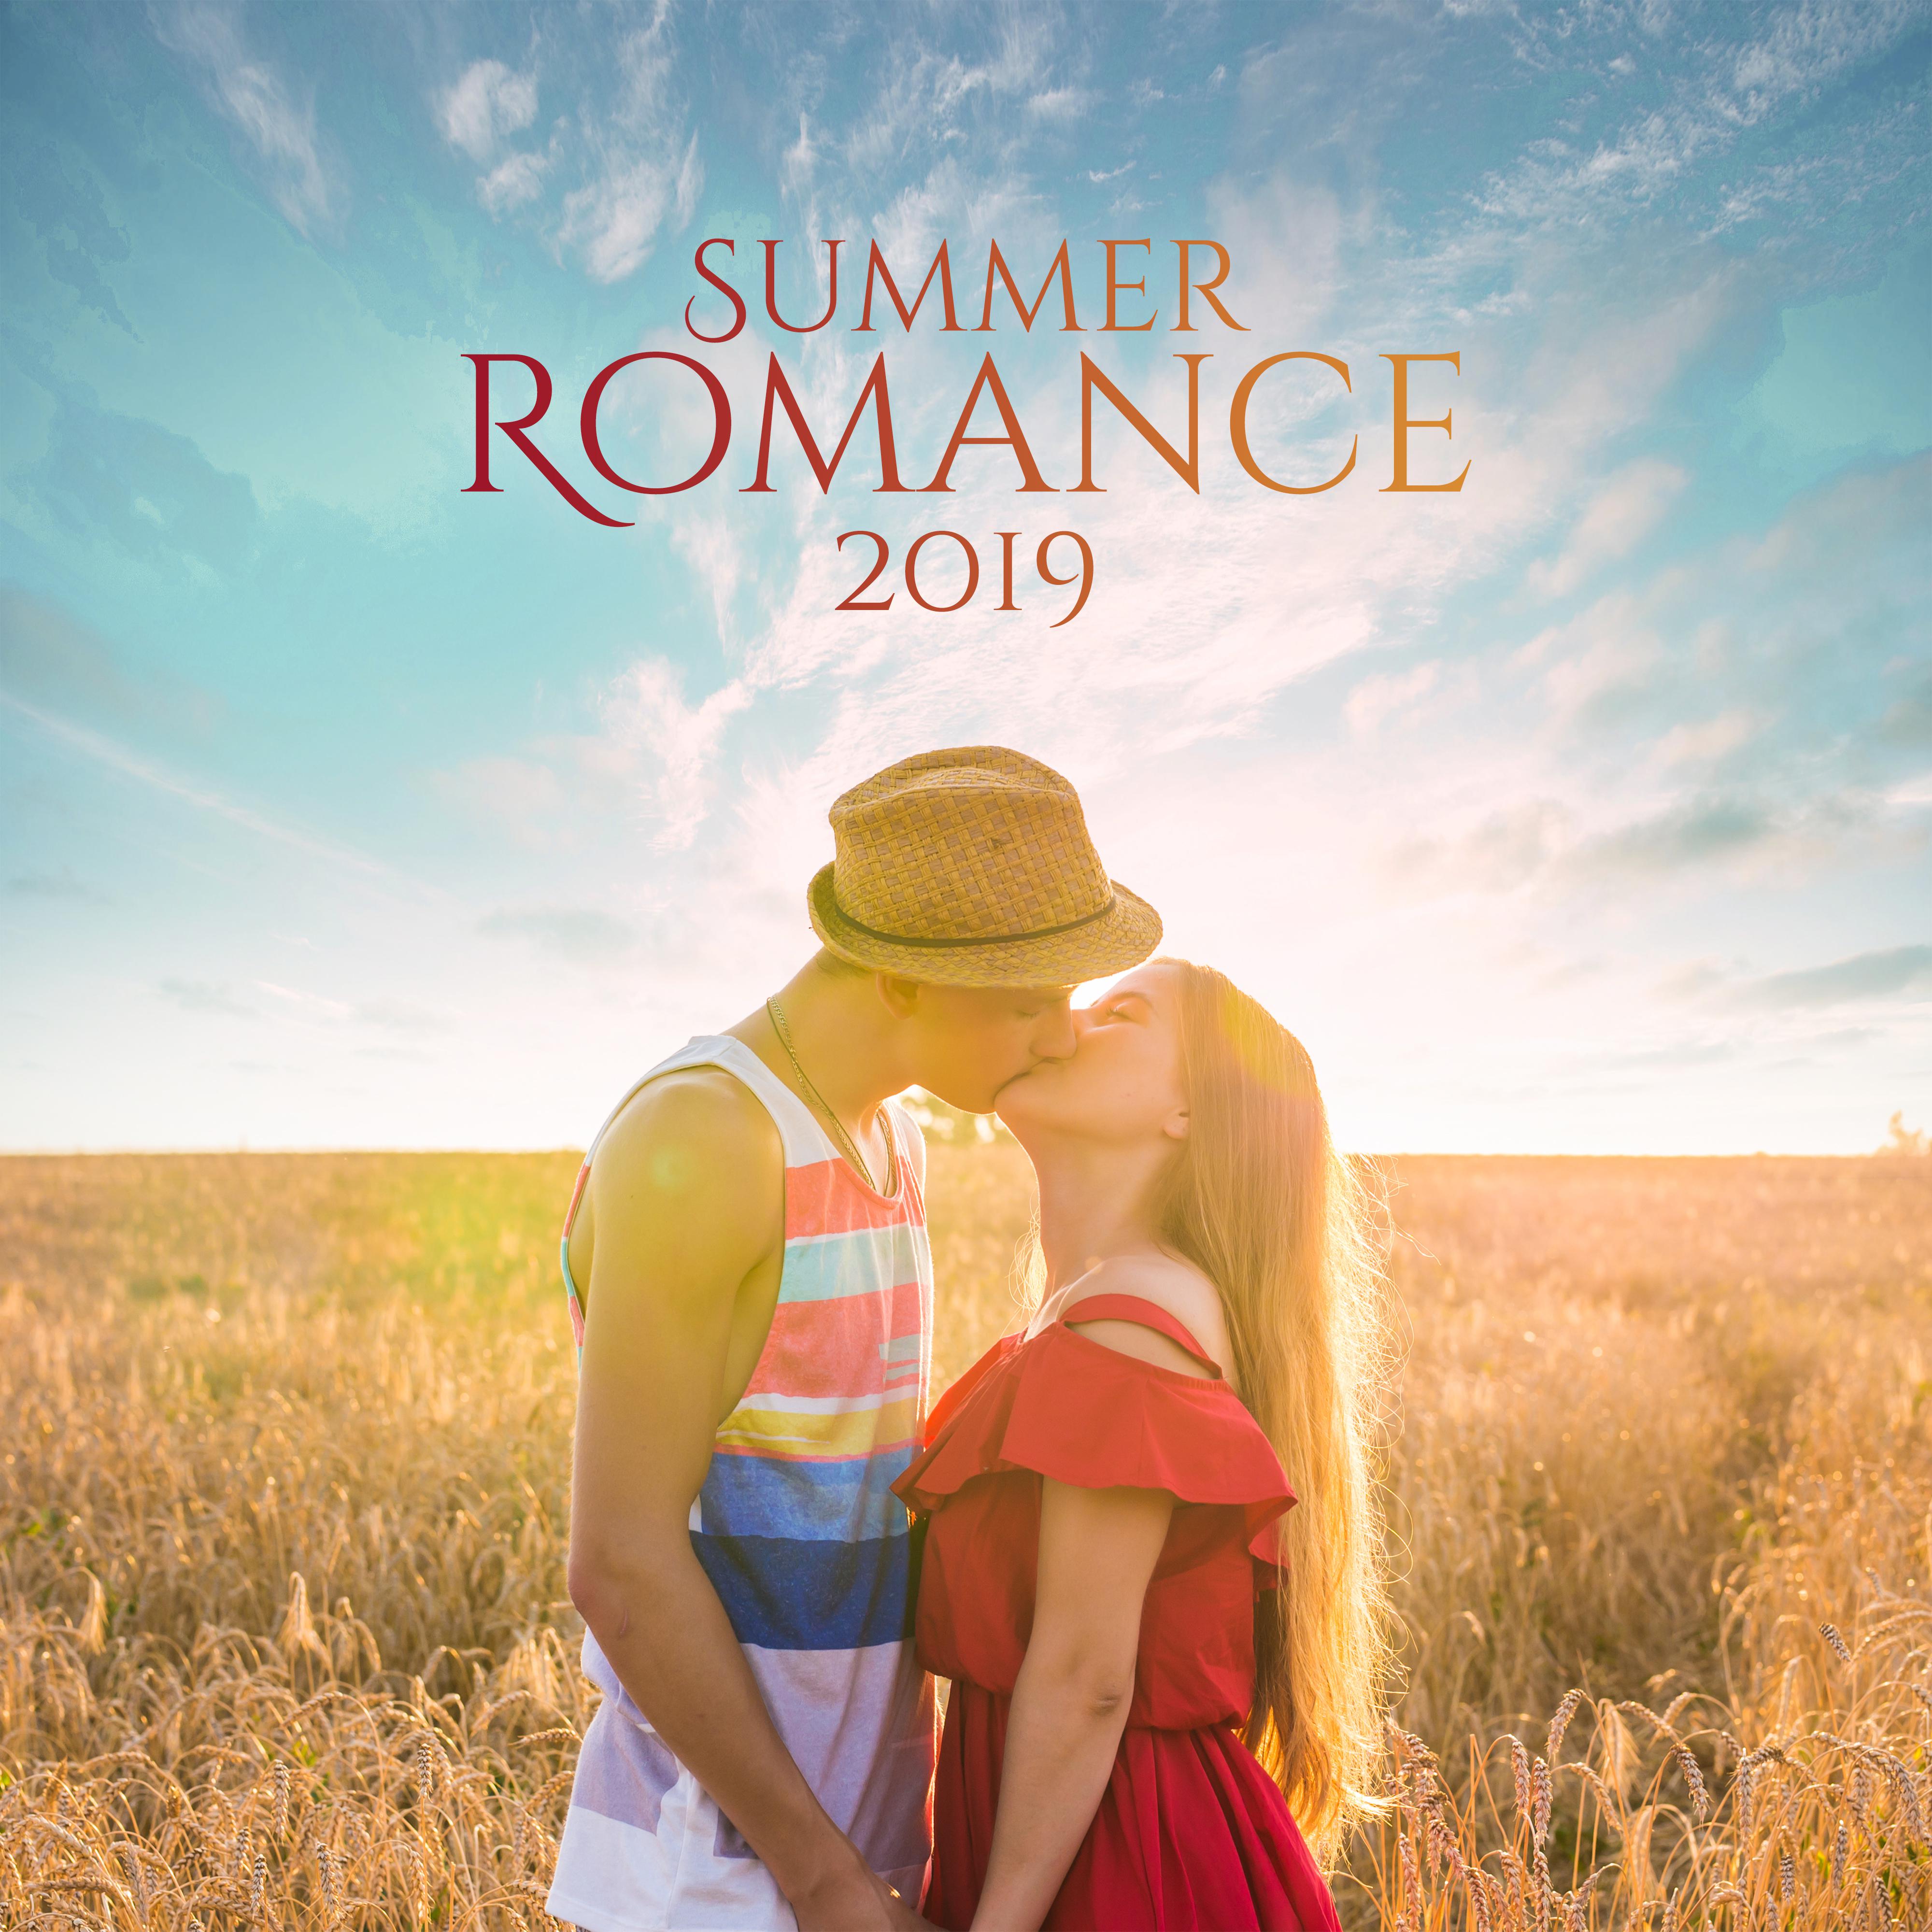 Summer Romance 2019 - Sensual, Tempting and Seductive Chillout Music